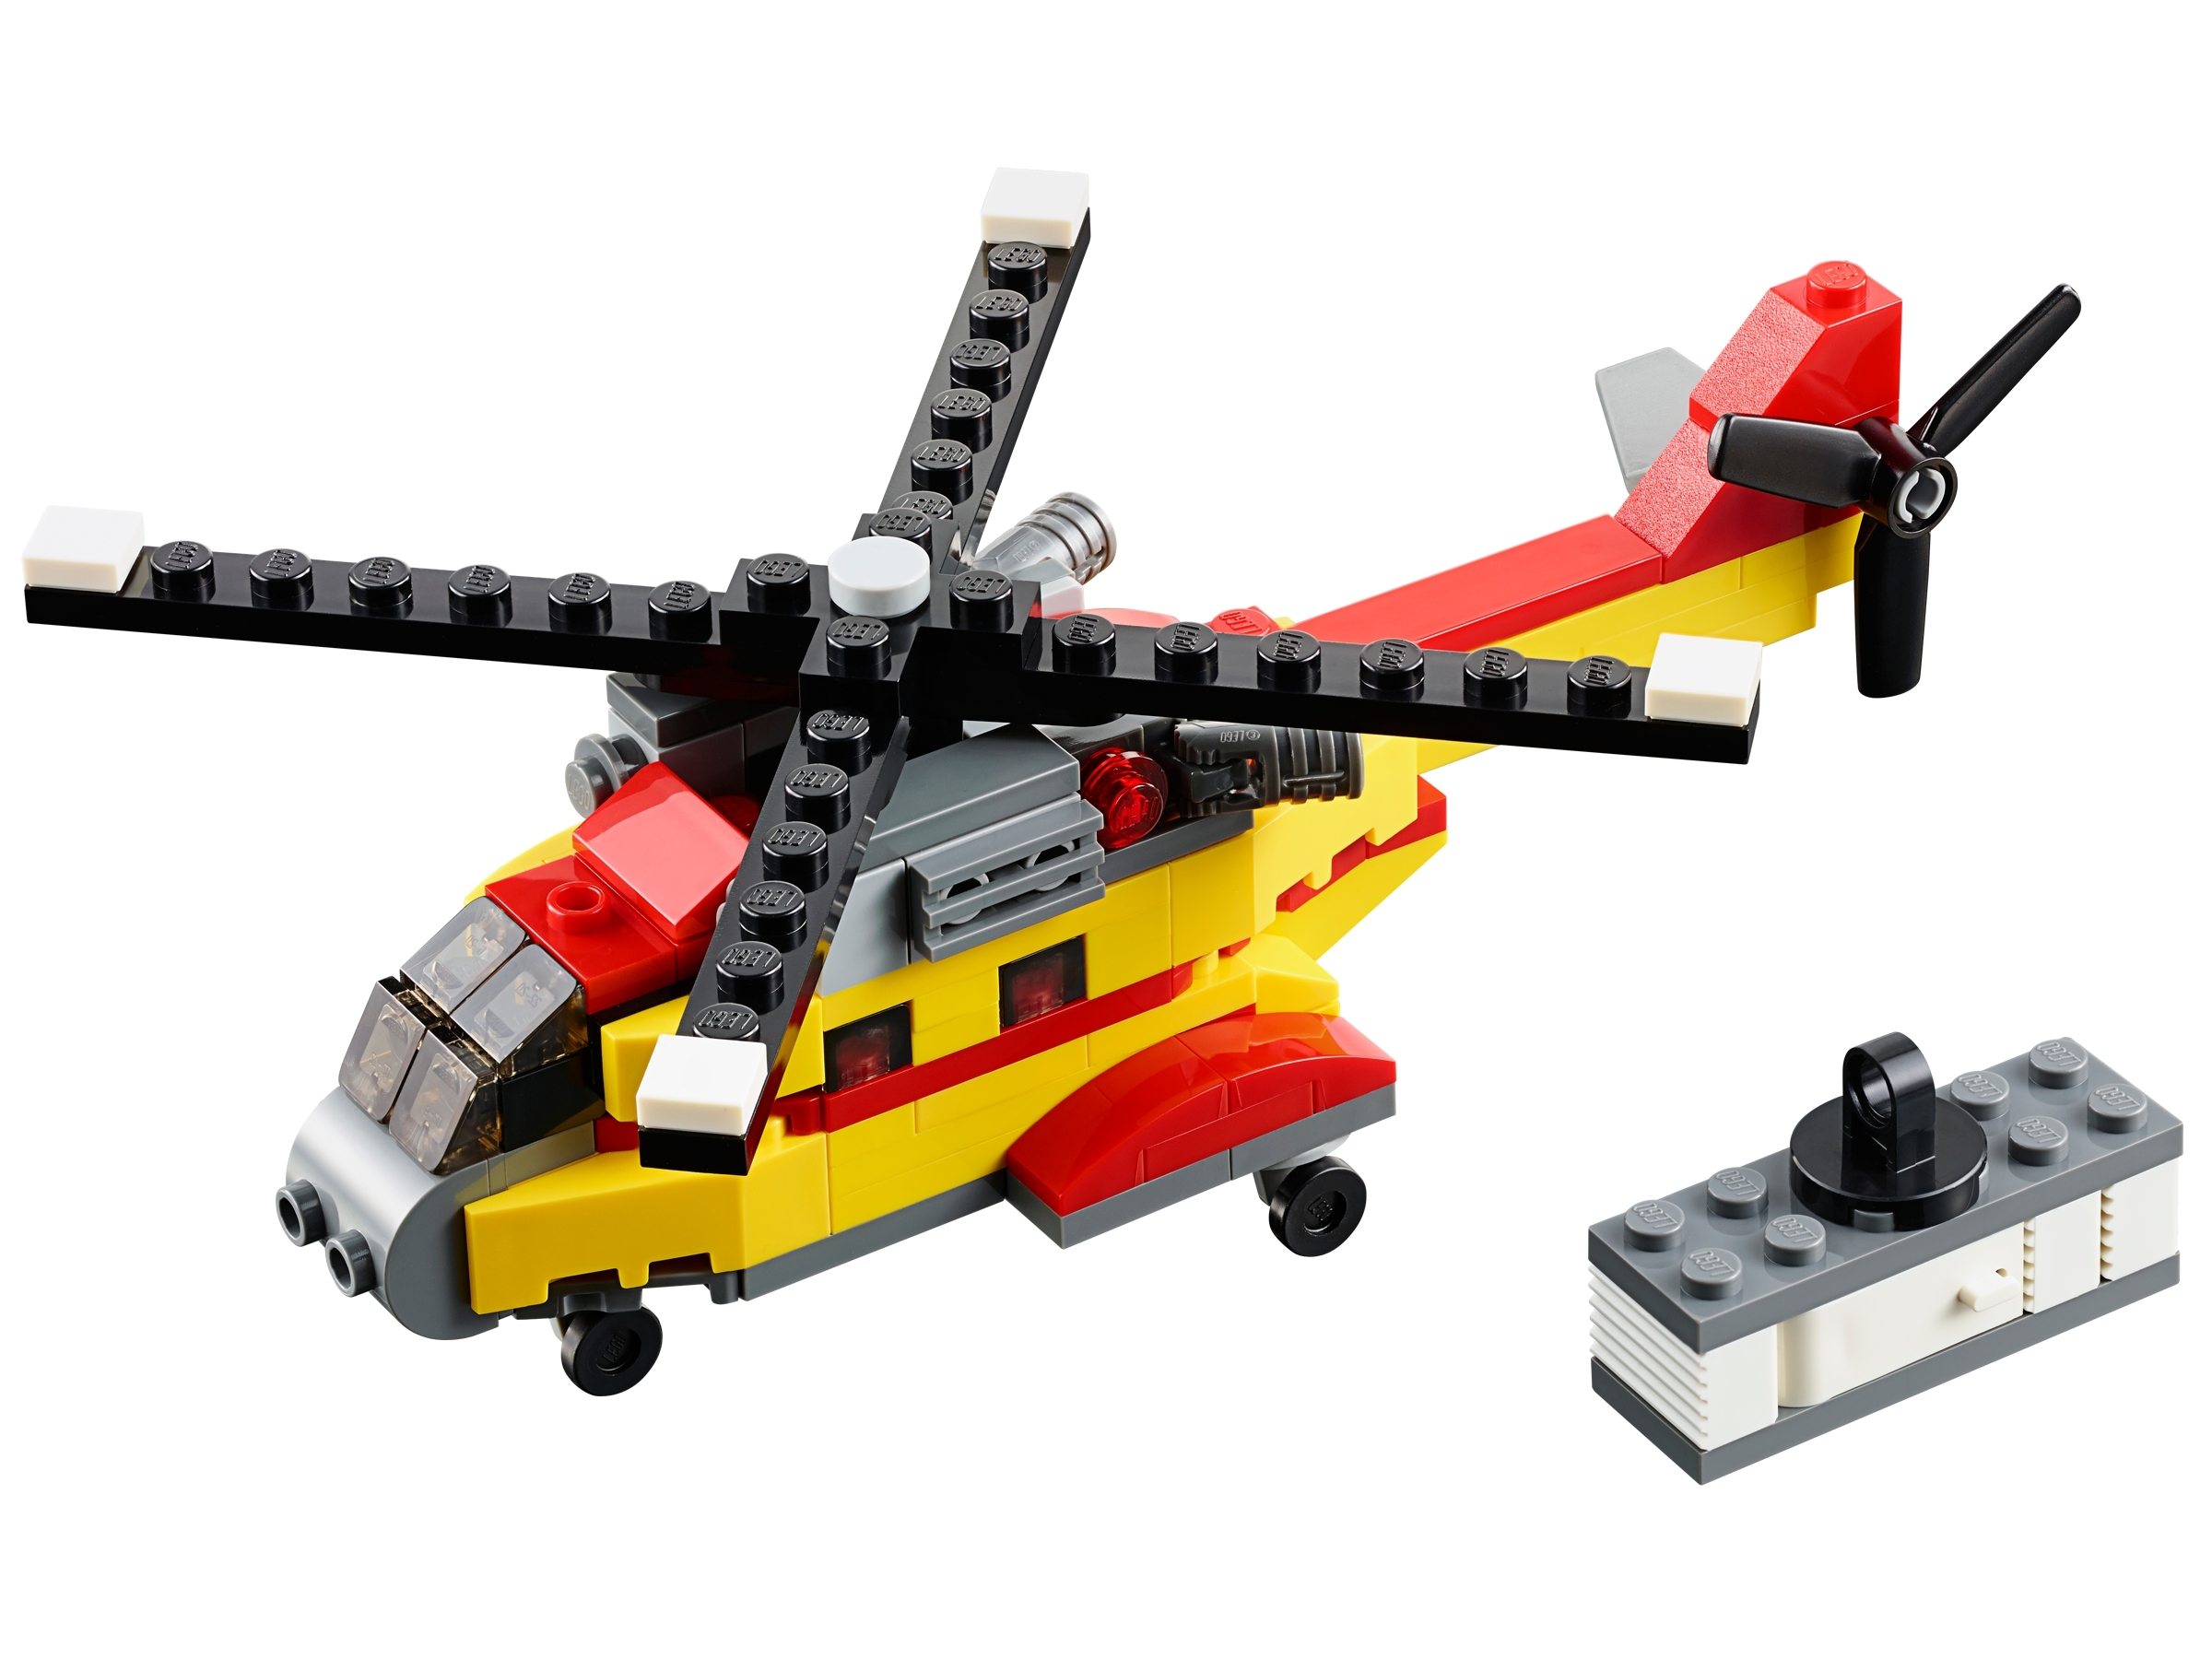 Cargo Heli 31029 | | Buy online at the Official LEGO® Shop US